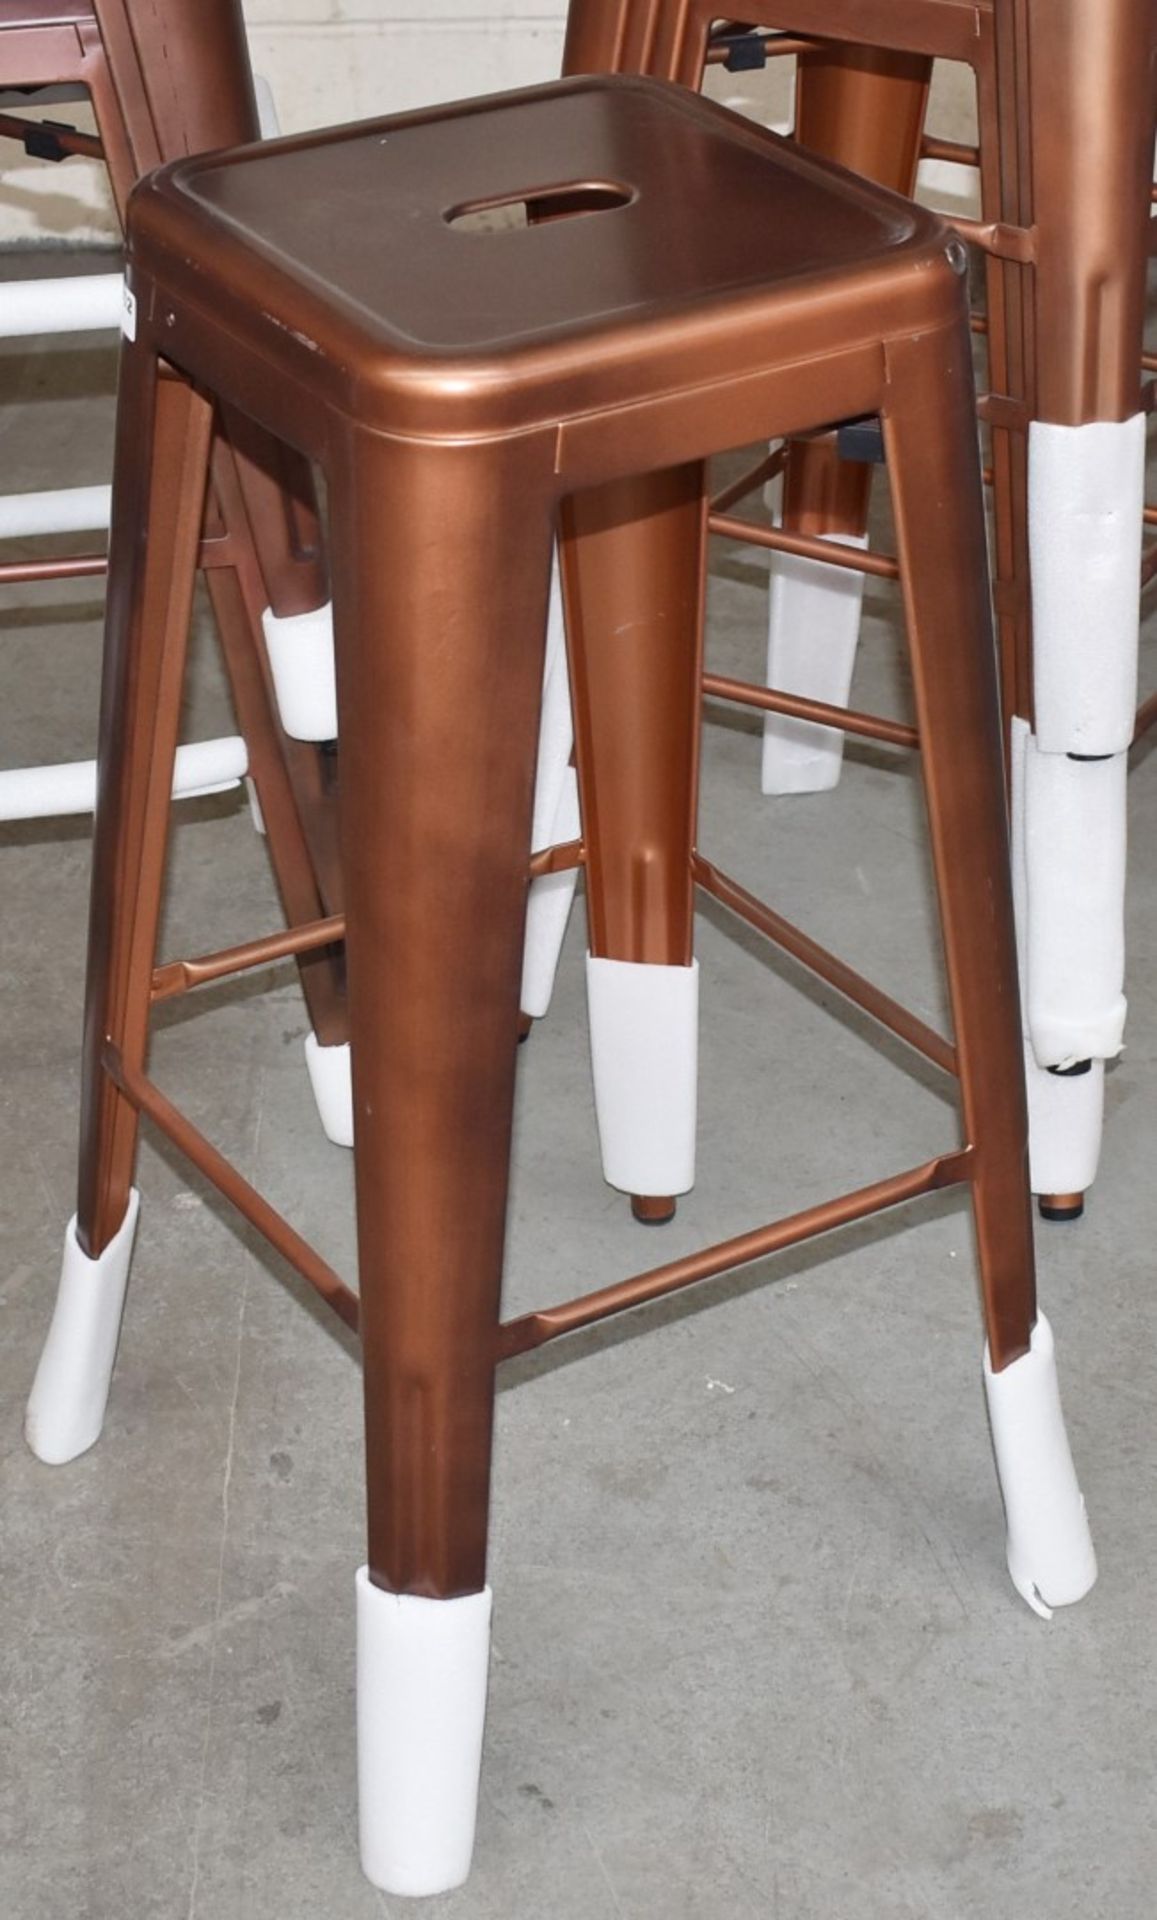 4 x Industrial Tolix Style Stackable Bar Stools With Backrests - Finish: COPPER - Ideal For Bistros, - Image 2 of 6